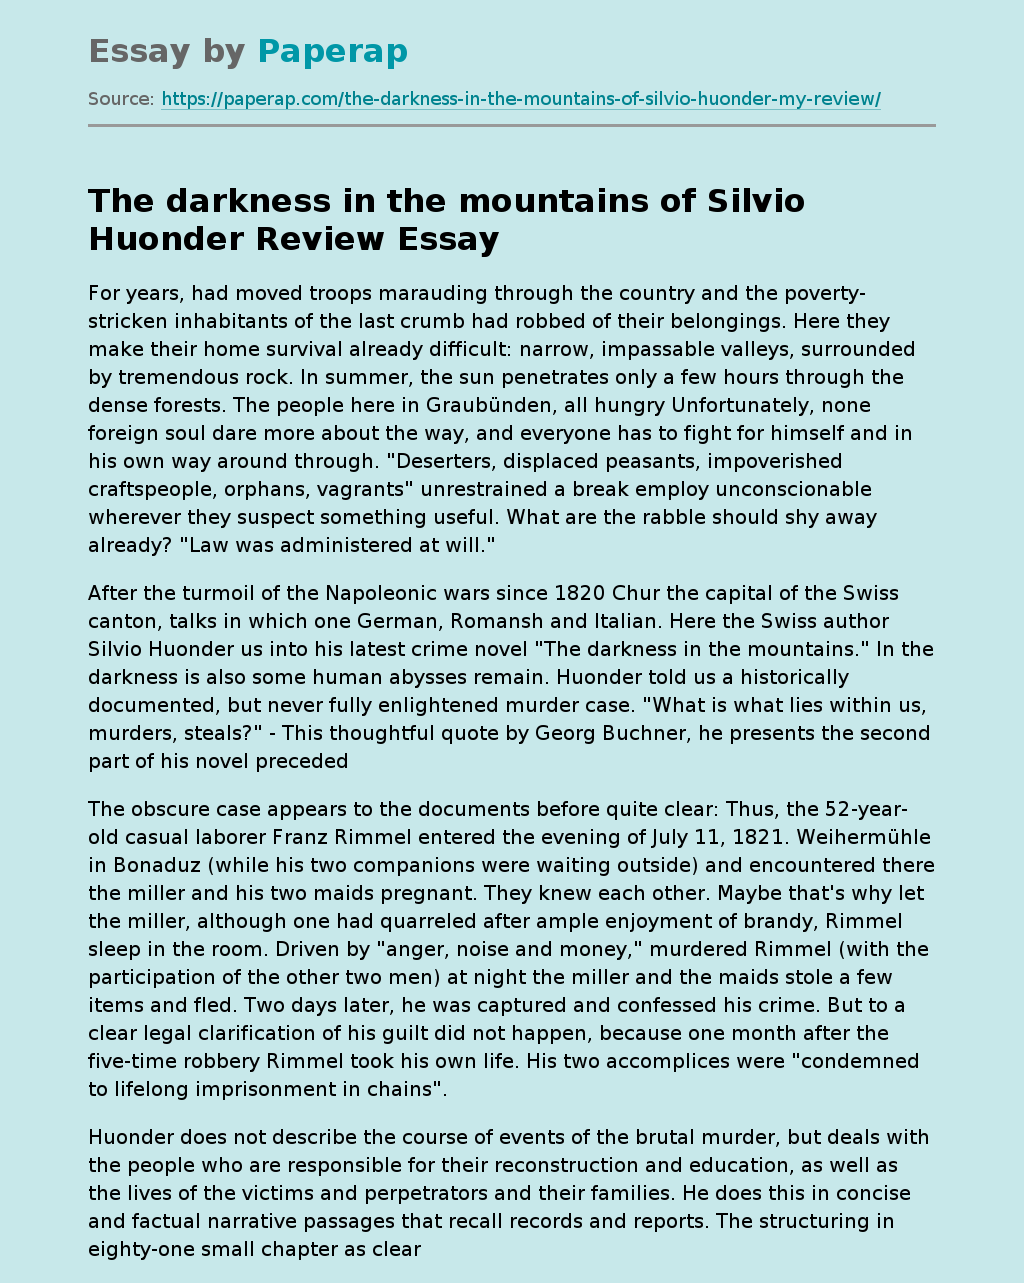 “The Darkness in the Mountains” of Silvio Huonder